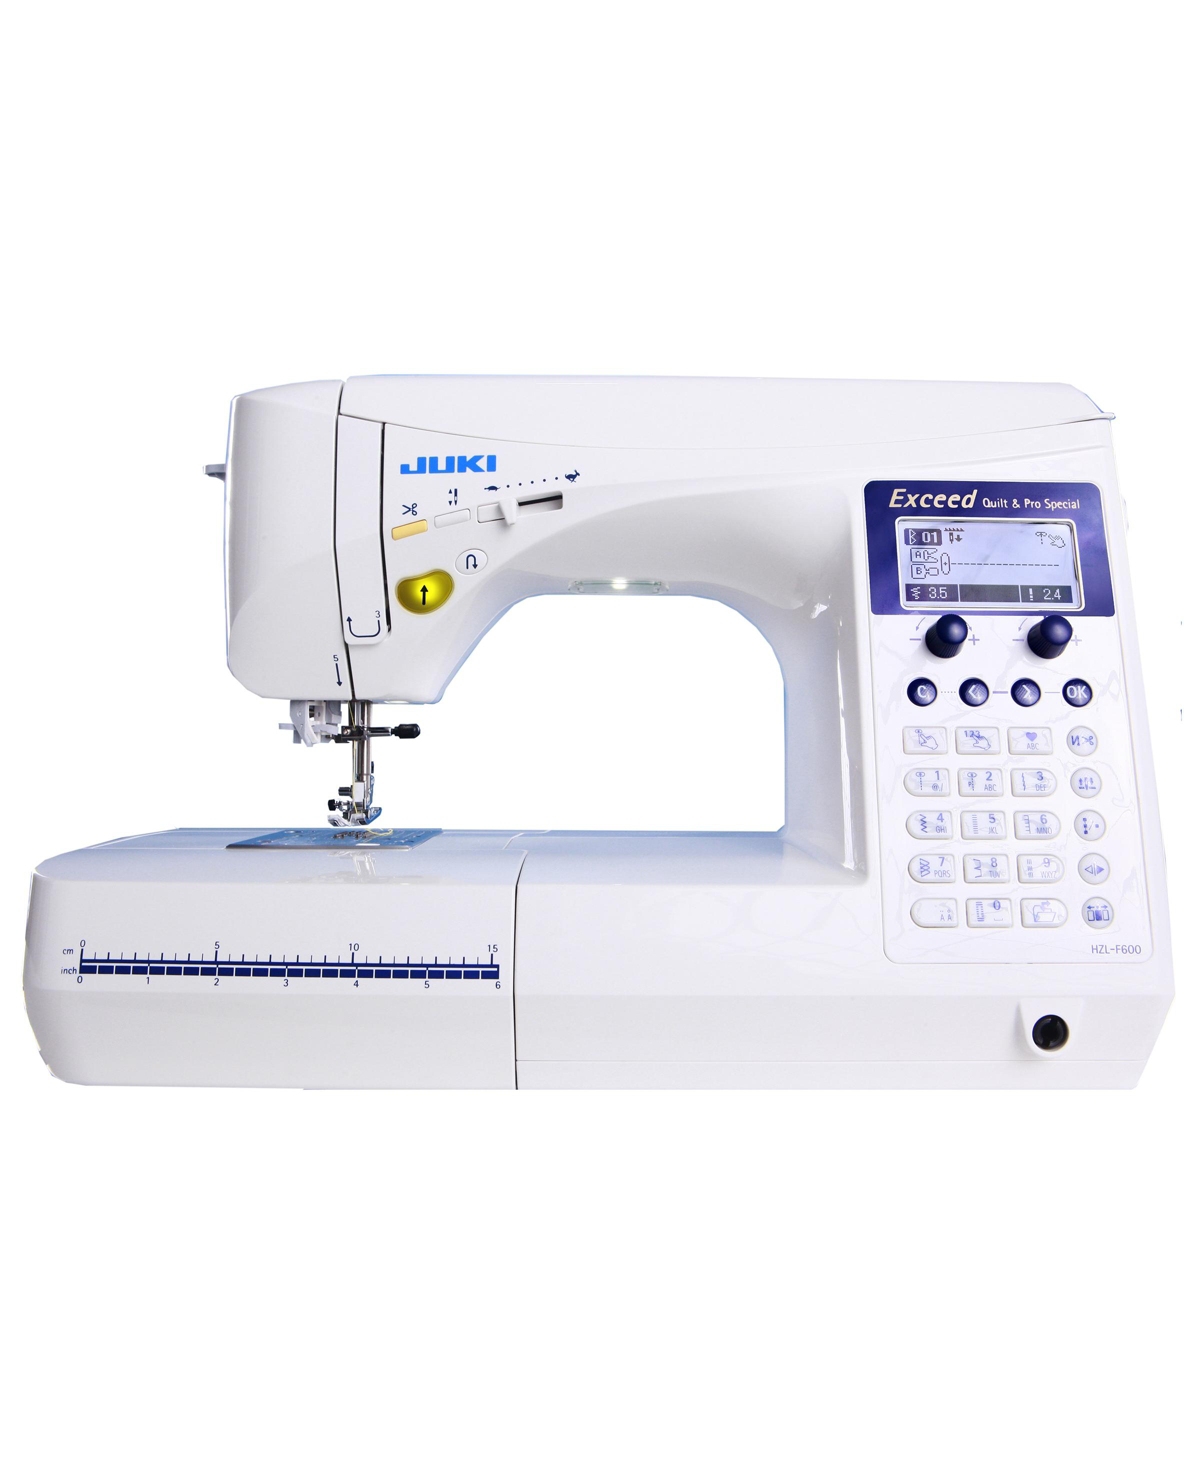 Hzl-F600 Computerized Sewing and Quilting Machine - White